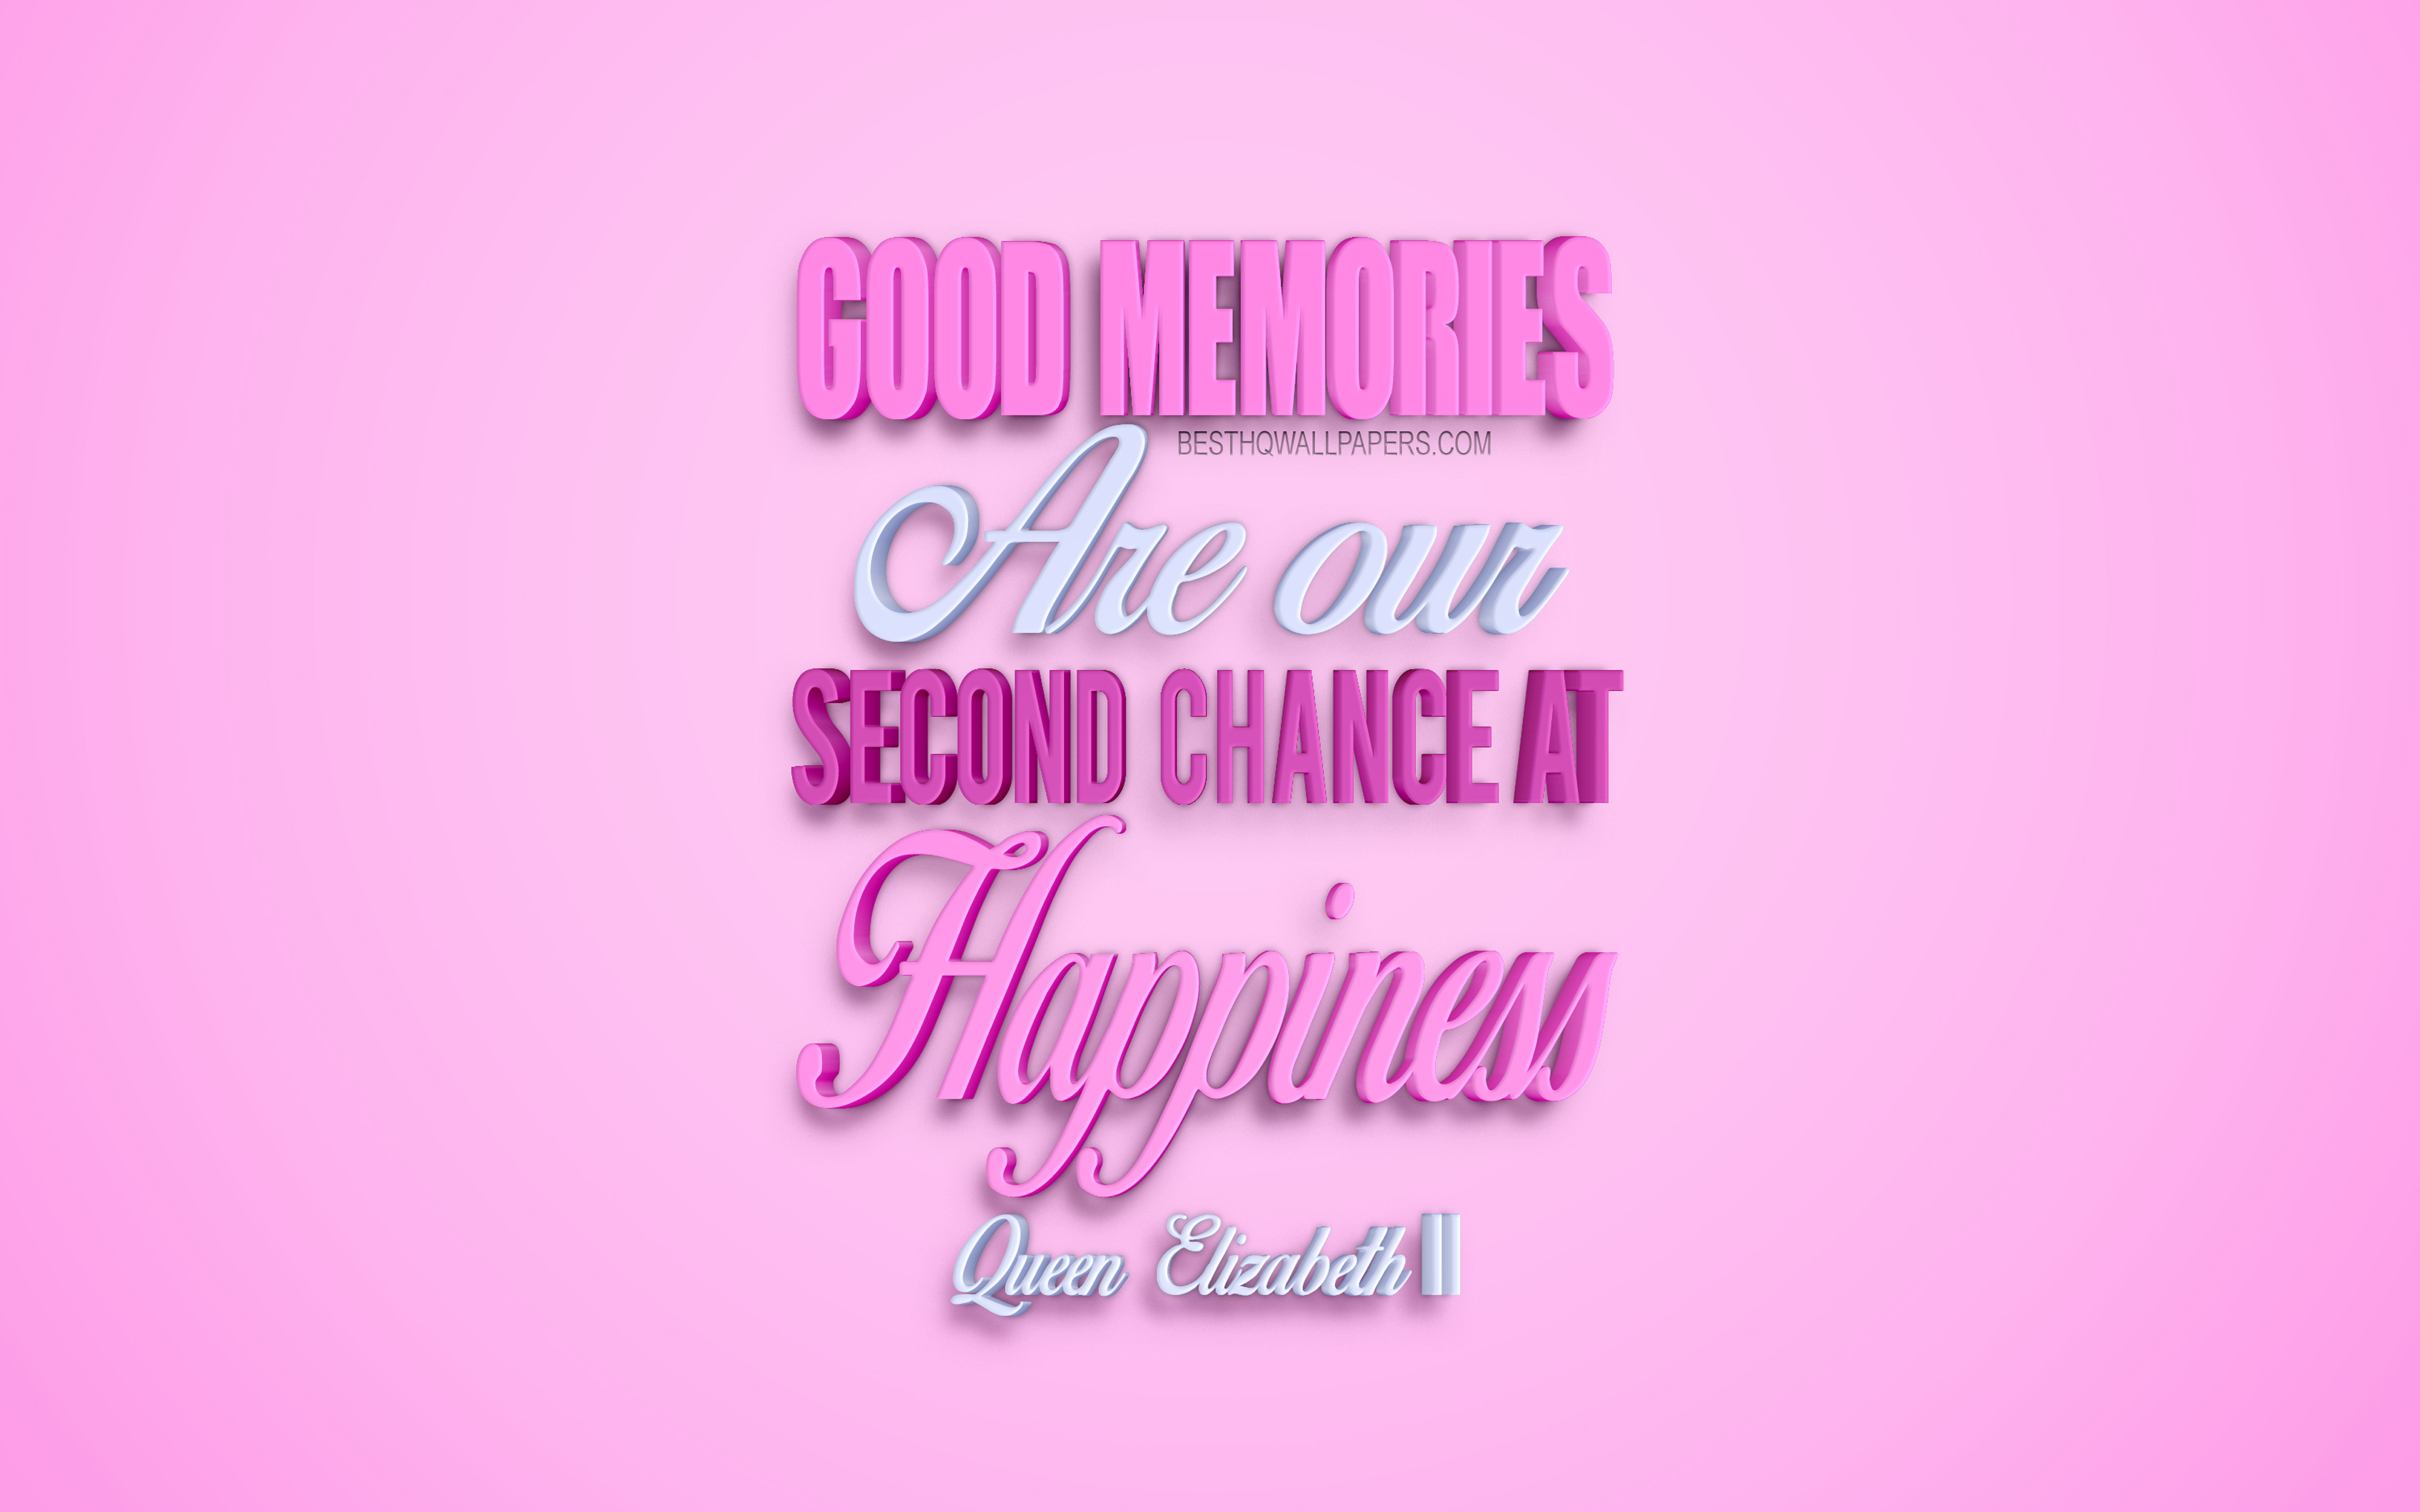 Download wallpaper Good memories are our second chance at